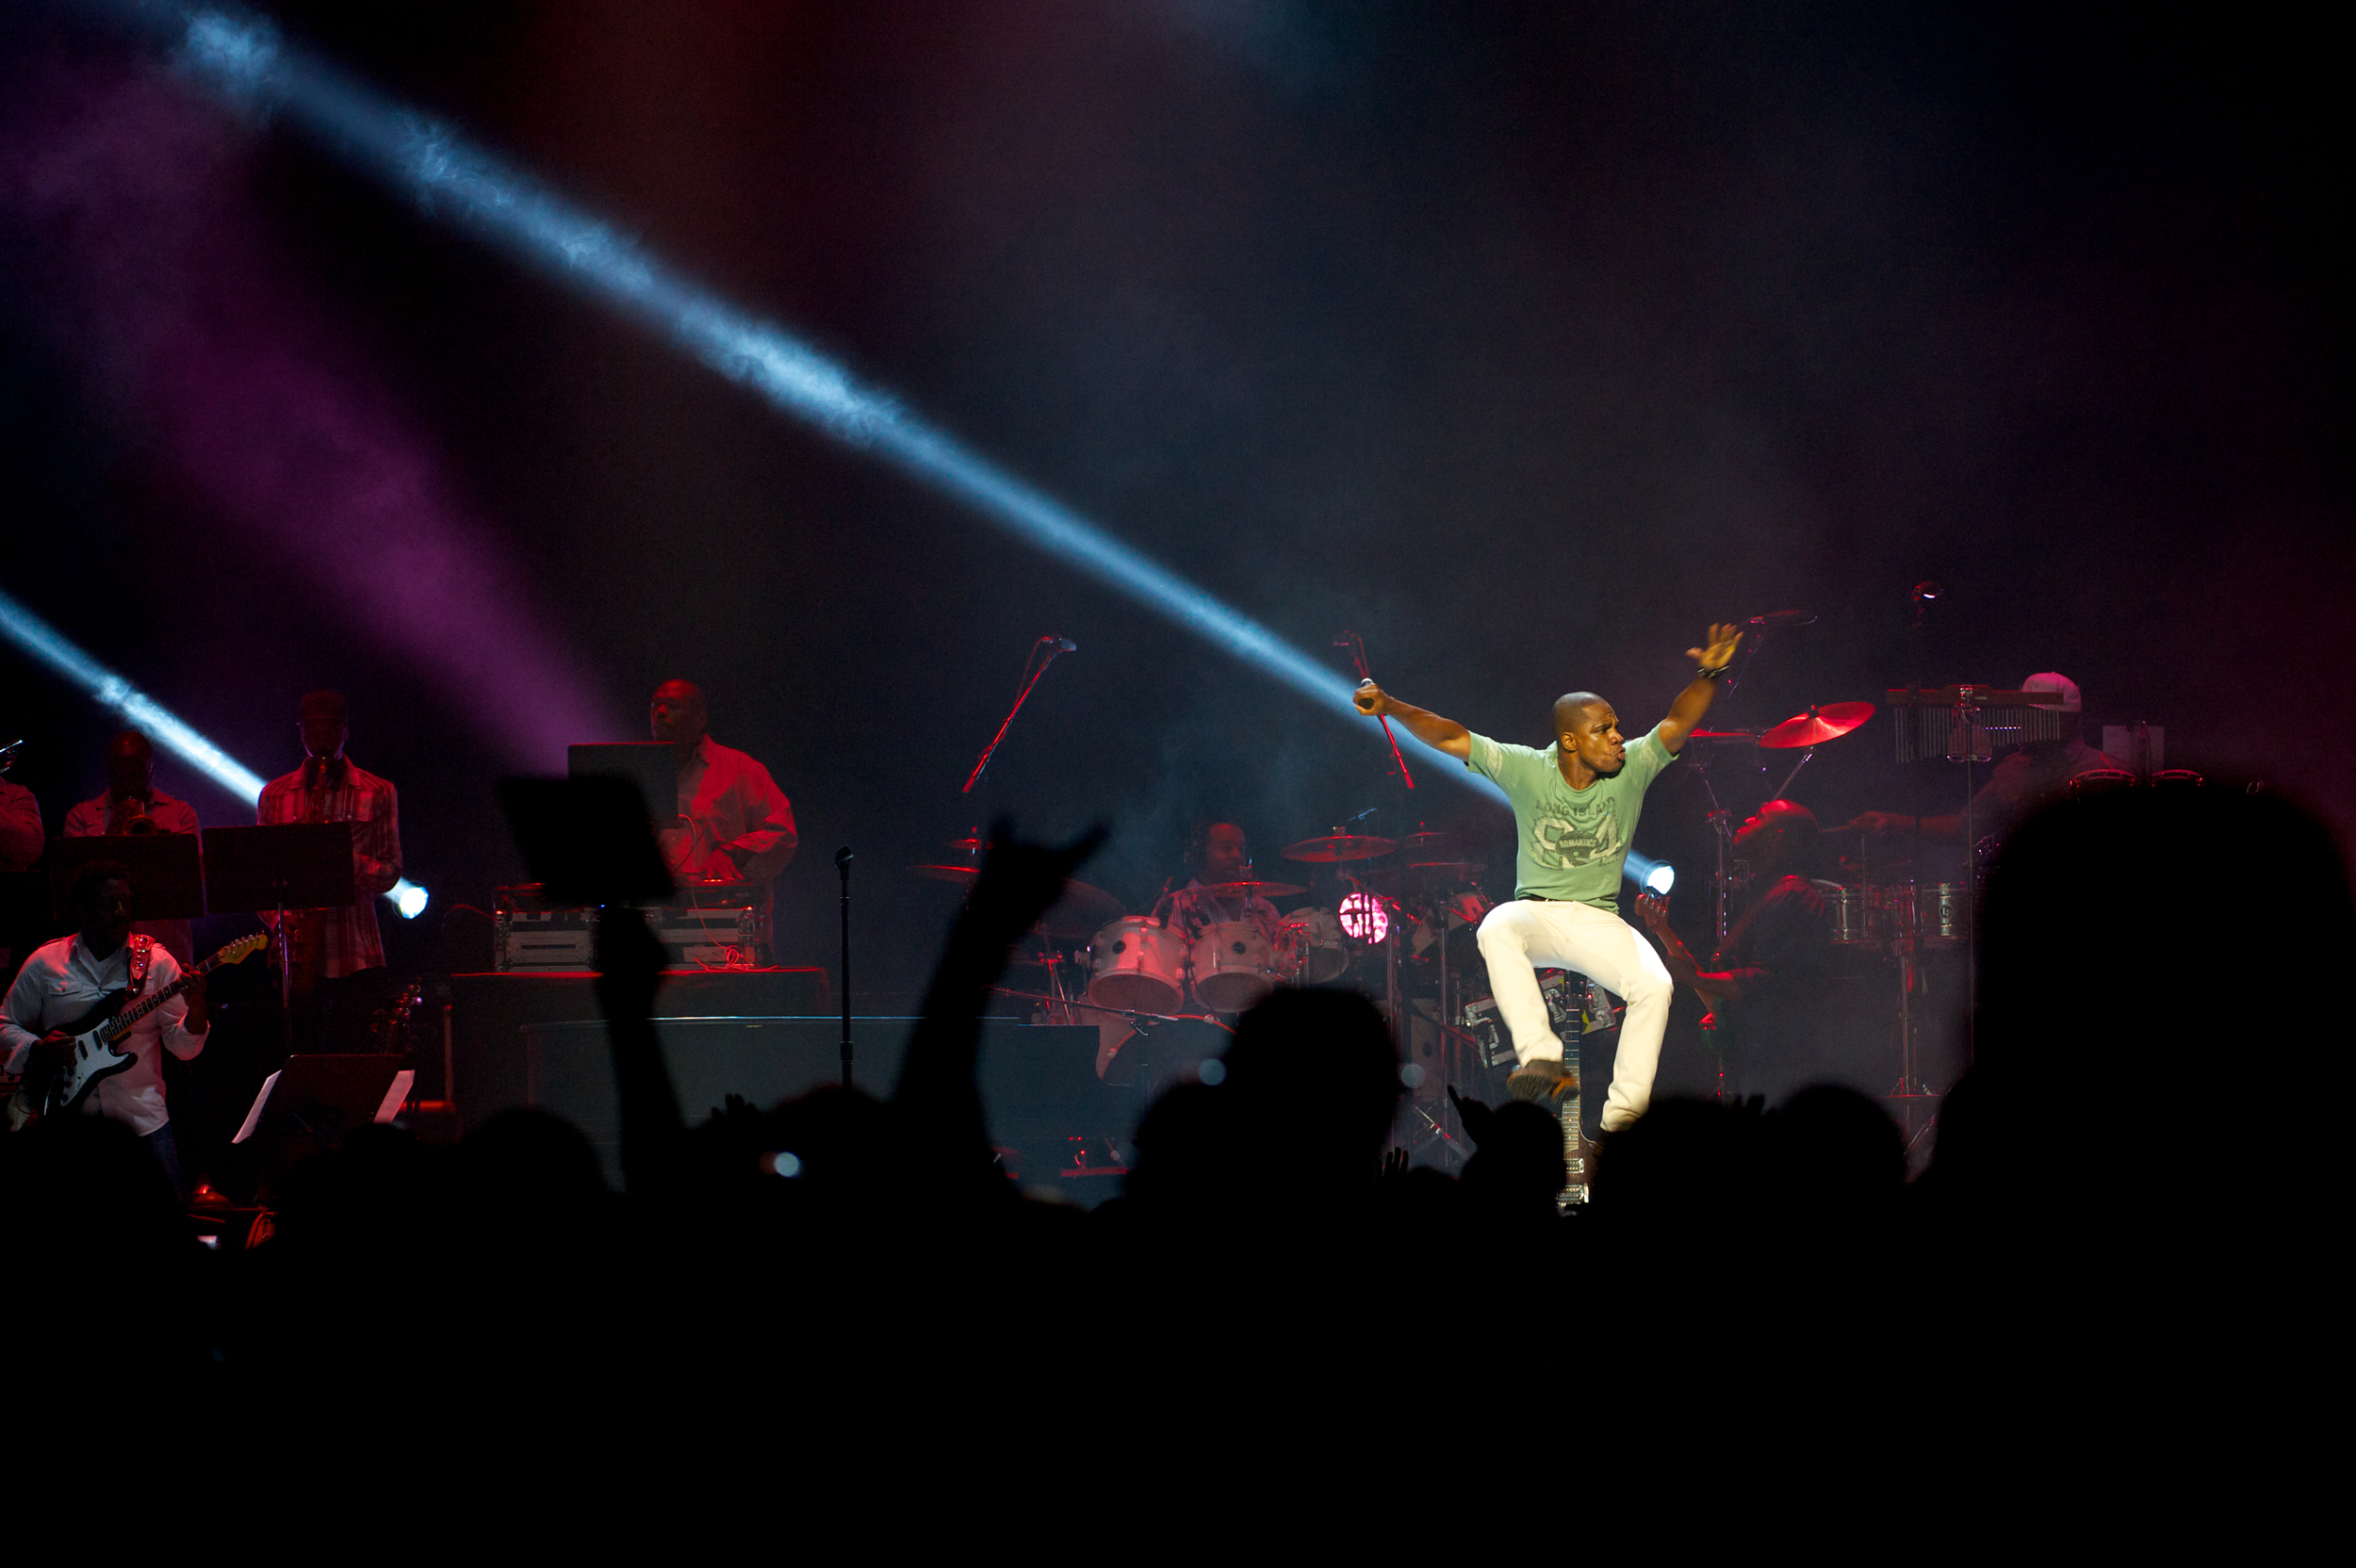  American gospel musician, director, and author Kirk Franklin who is also known for leading such choir like God's Property dances on-stage as a part of the King's Men tour, also starring Israel Houghton, Marvin Sapp, and Donnie McClurkin.  (Photo by 